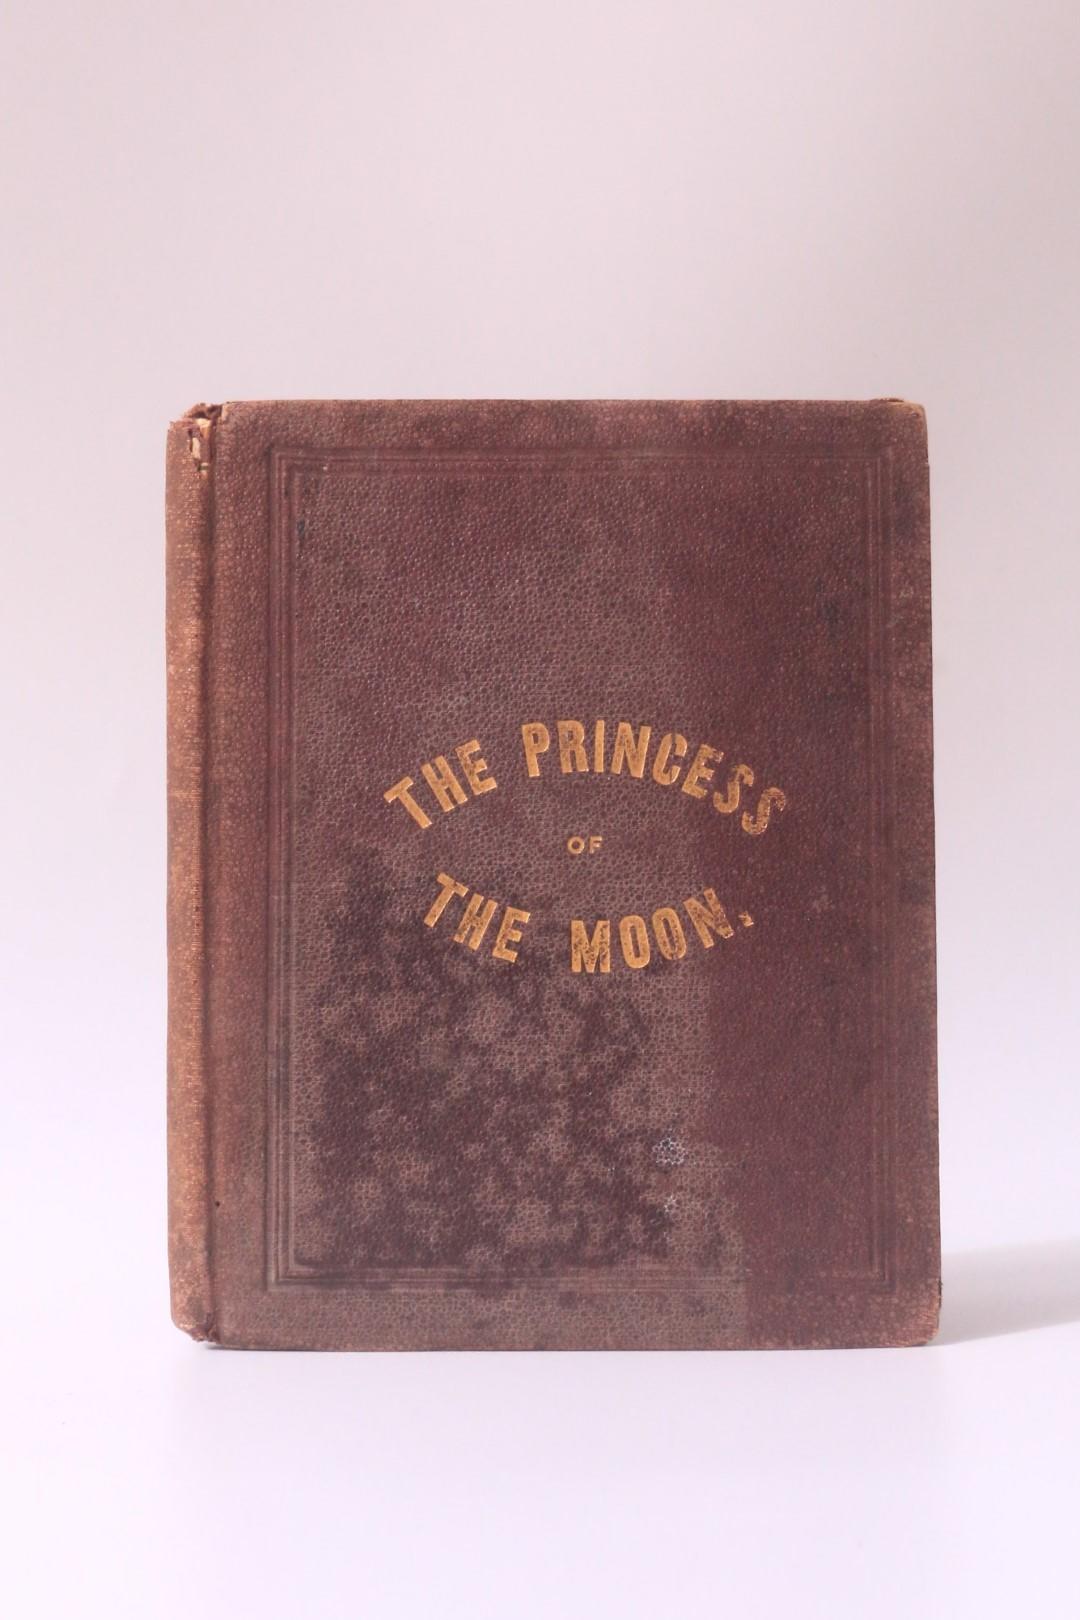 Anonymous [Cora Semmes Ives] - The Princess Of The Moon. A Confederate Fairy Story. Written By A Lady Of Warrenton, Va. - Printed by the Sun and Book Office, Baltimore [No Publisher], 1869, First Edition.